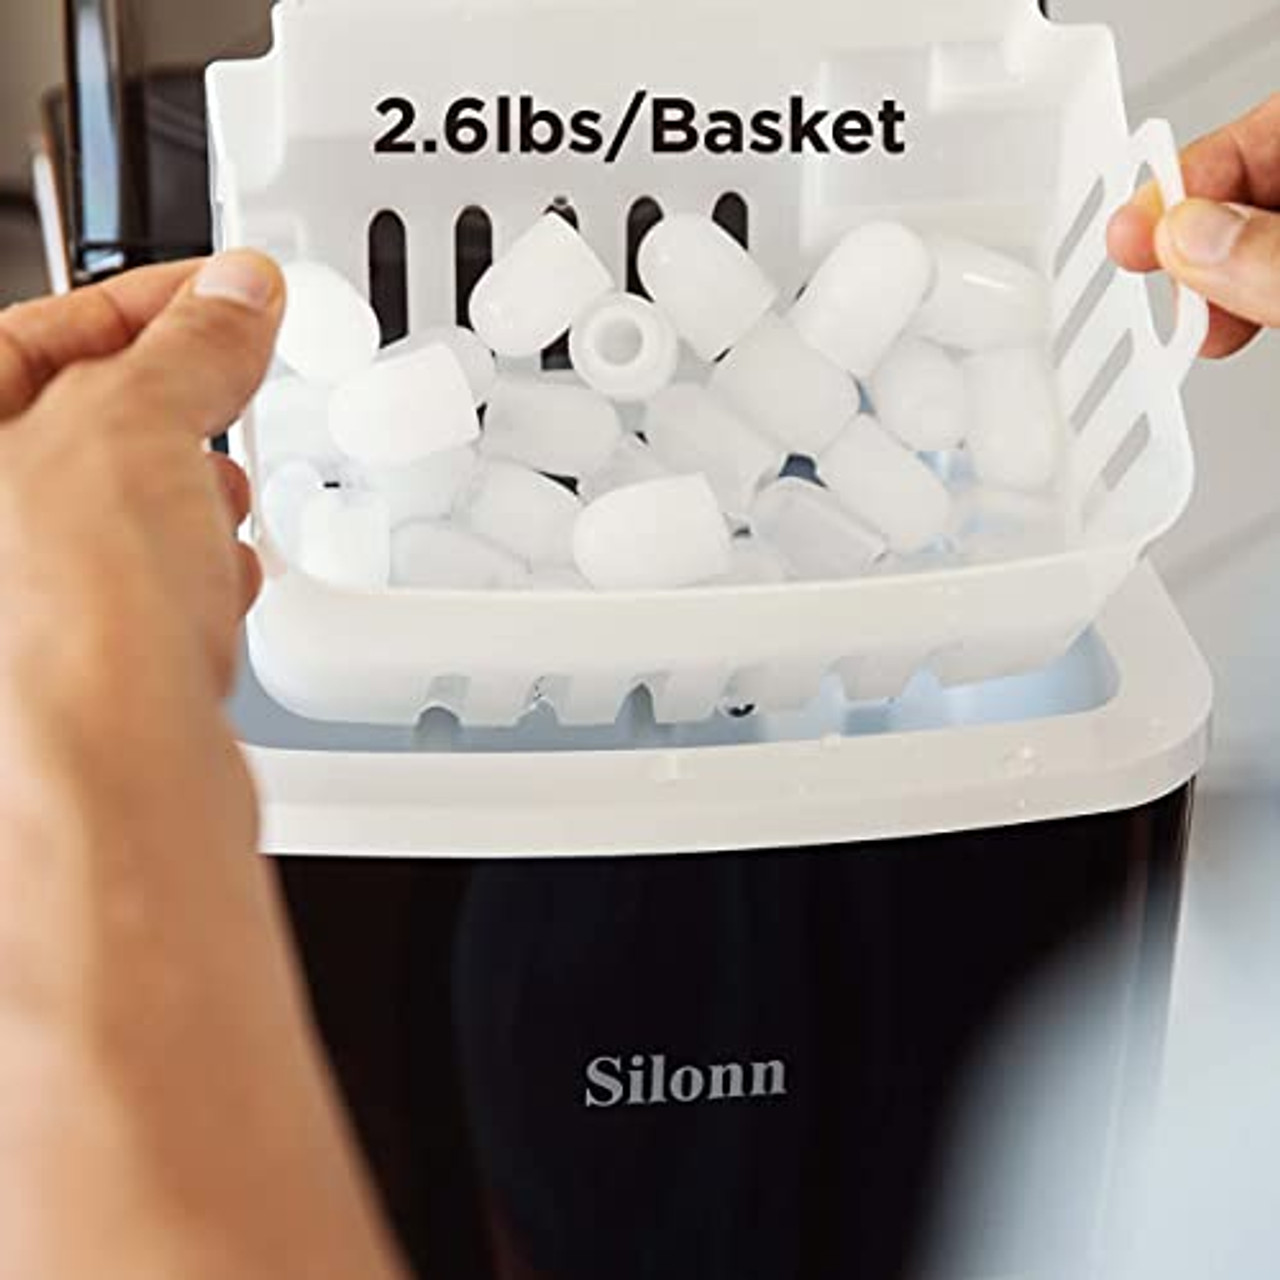 Should You Buy? Silonn Ice Maker Machine with Self Cleaning 